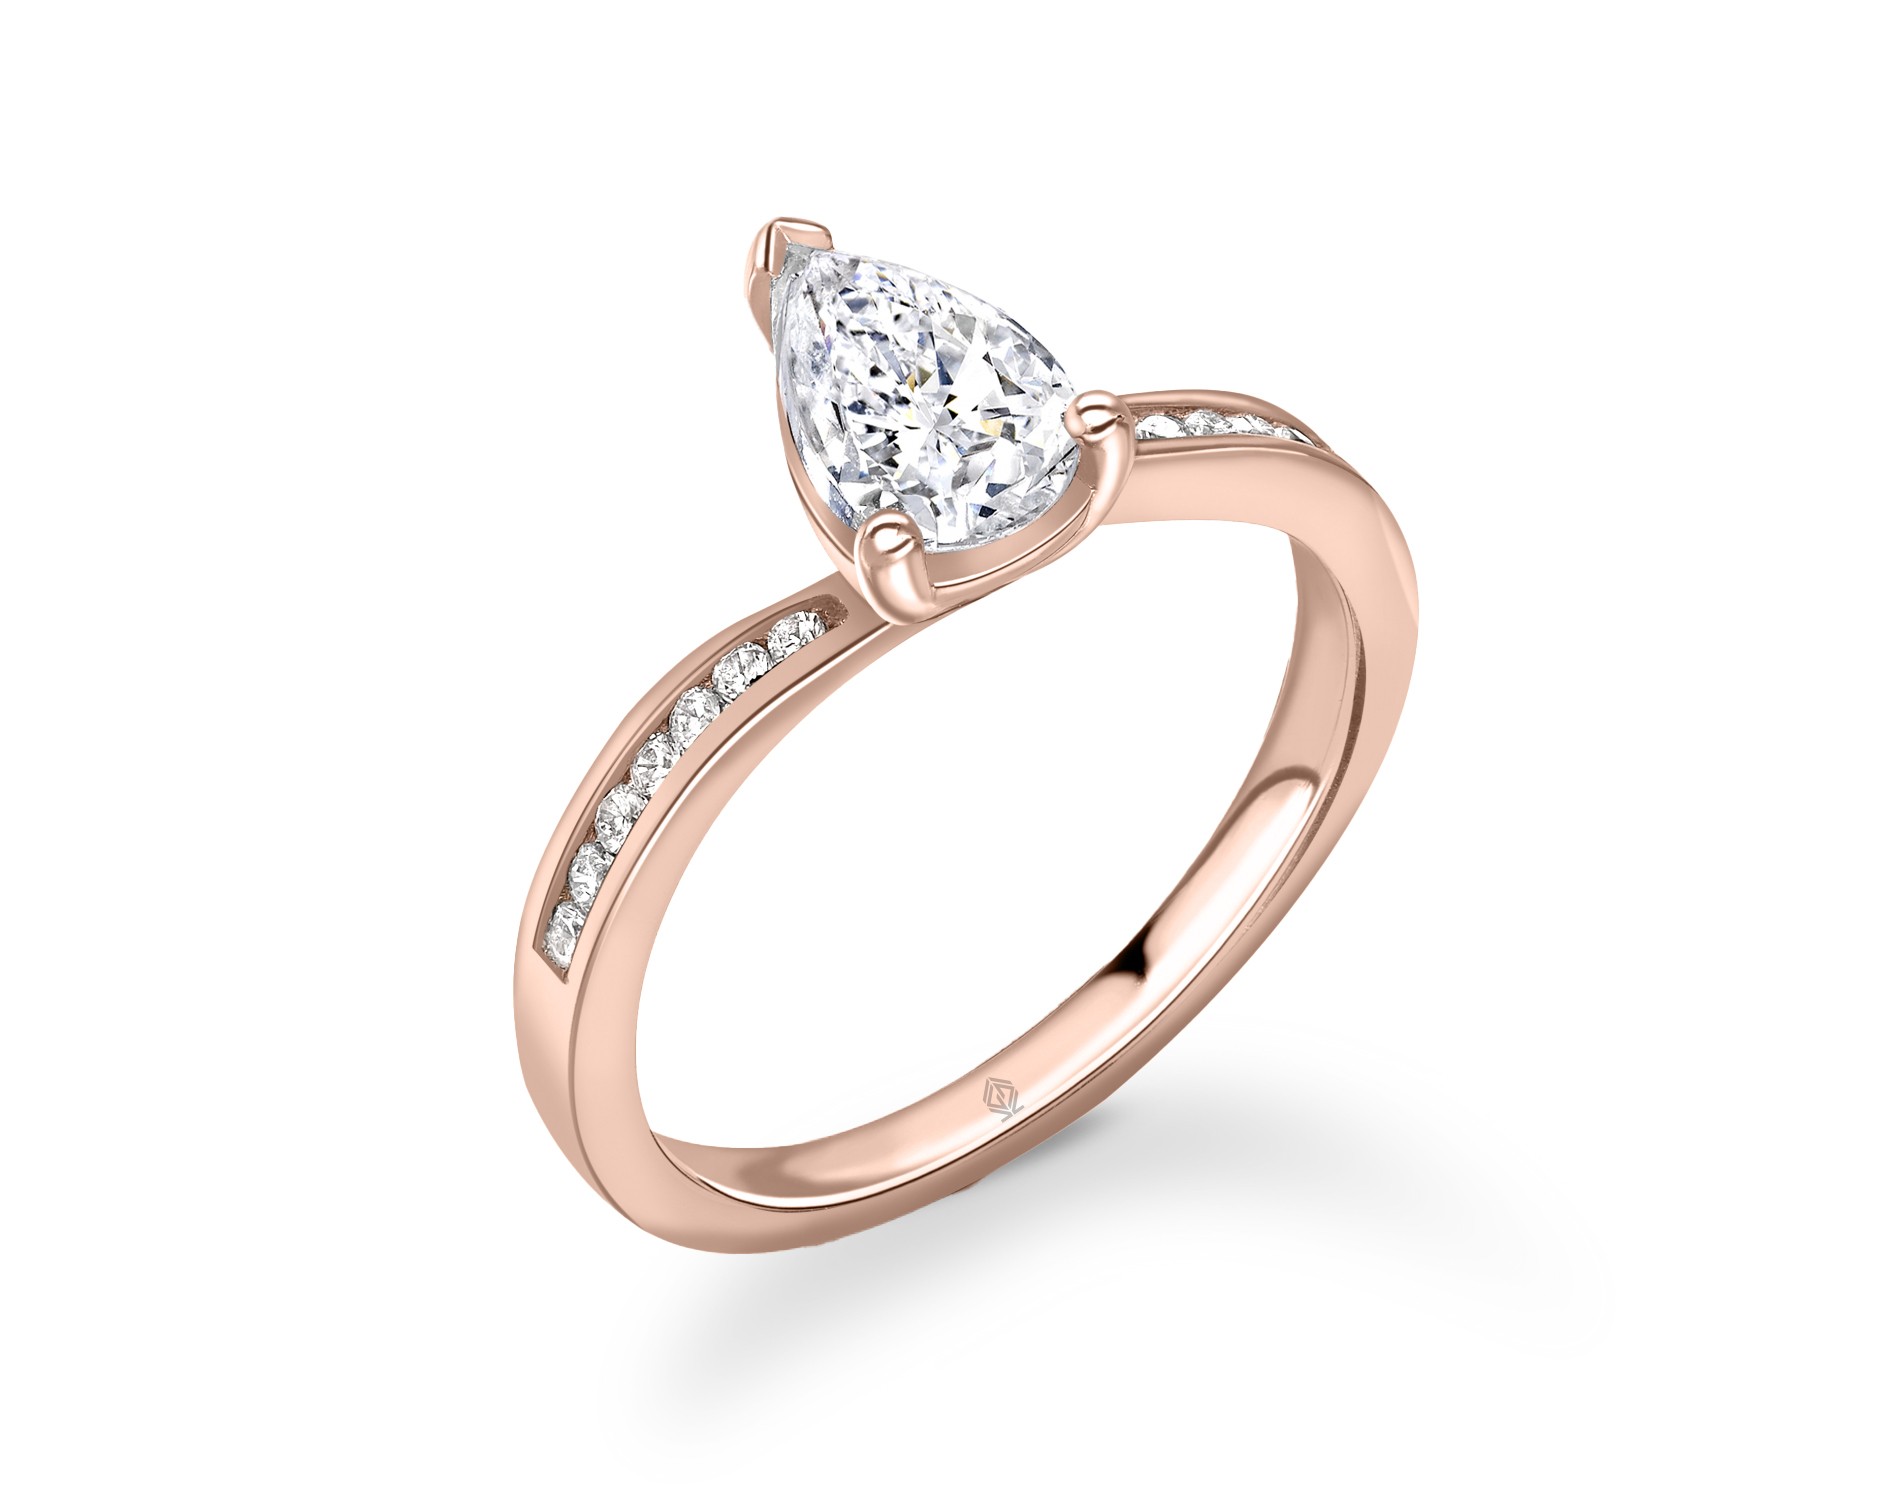 18K ROSE GOLD 3 PRONGS PEAR CUT DIAMOND ENGAGEMENT RING WITH SIDE STONES CHANNEL SET